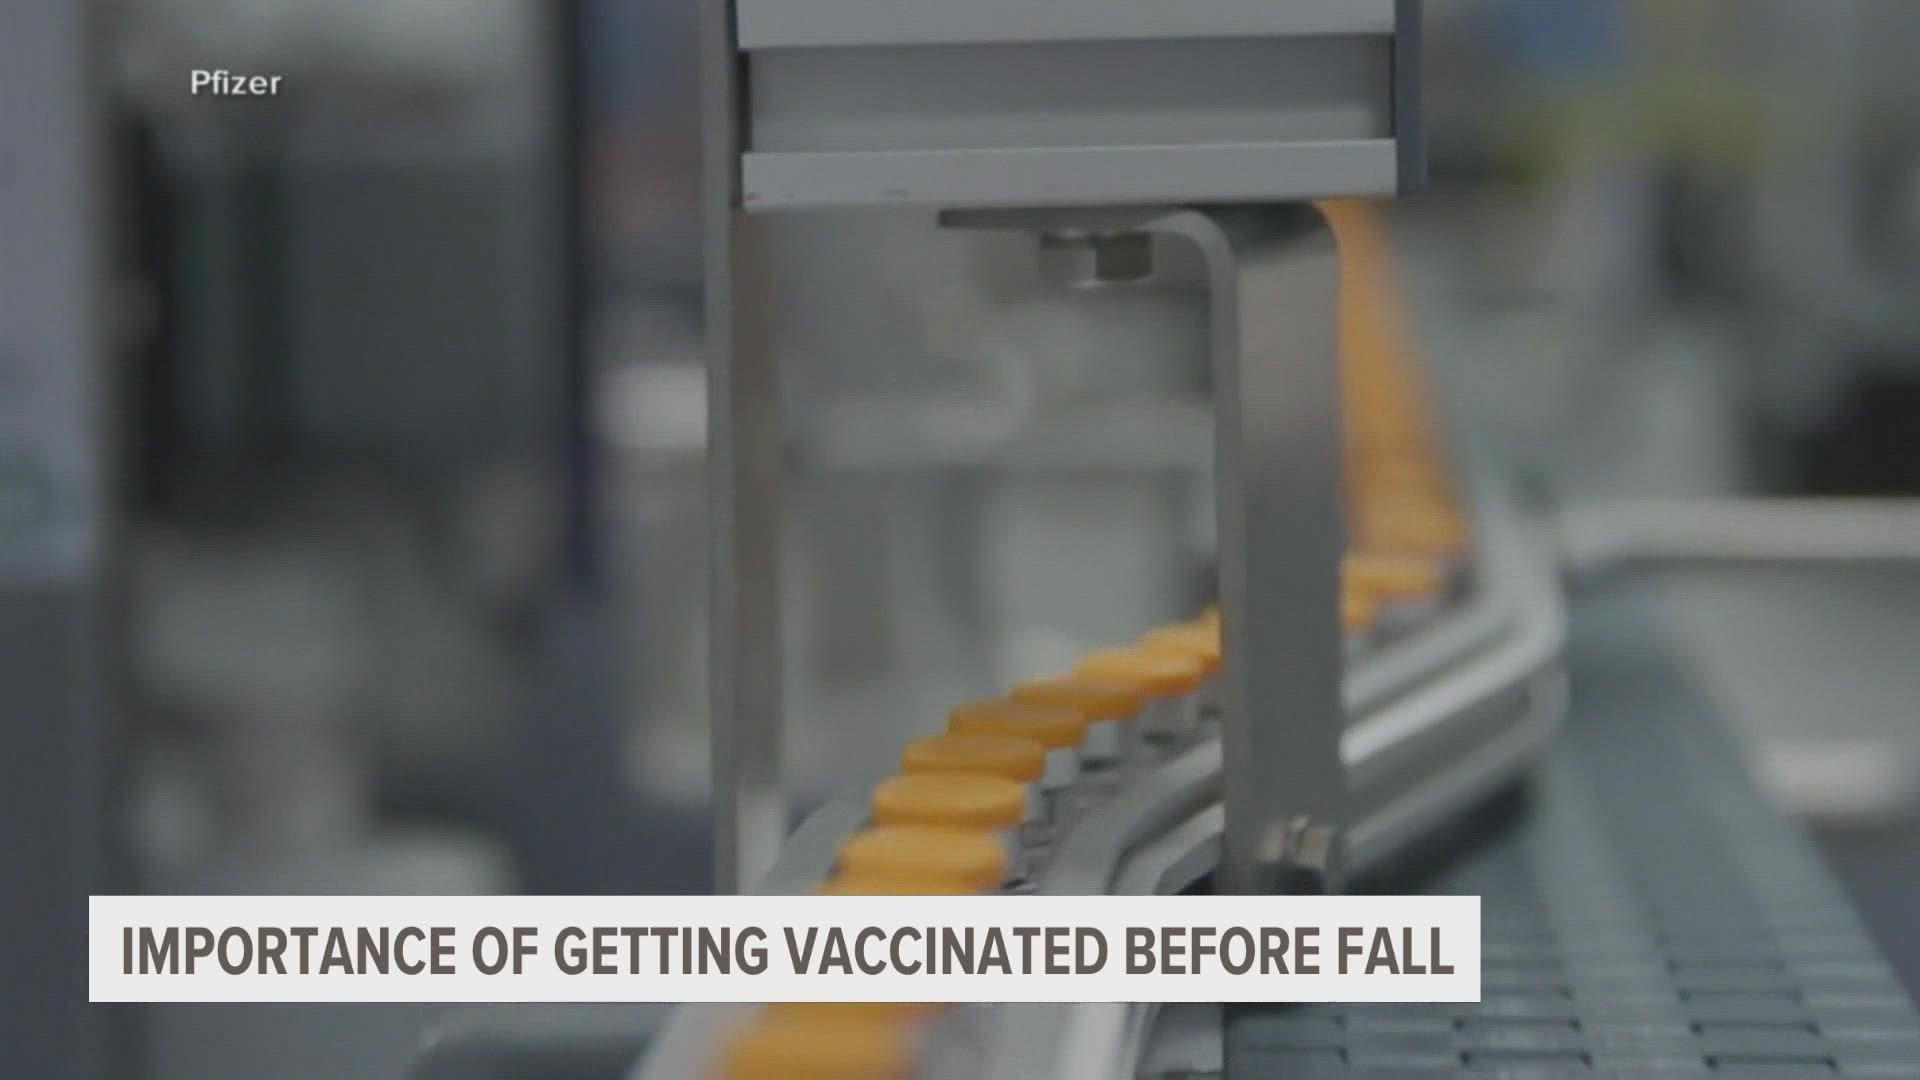 Doctors with the University of Michigan health system are urging people to get fully vaccinated and boosted now to prevent a surge in COVID-19 cases this fall.